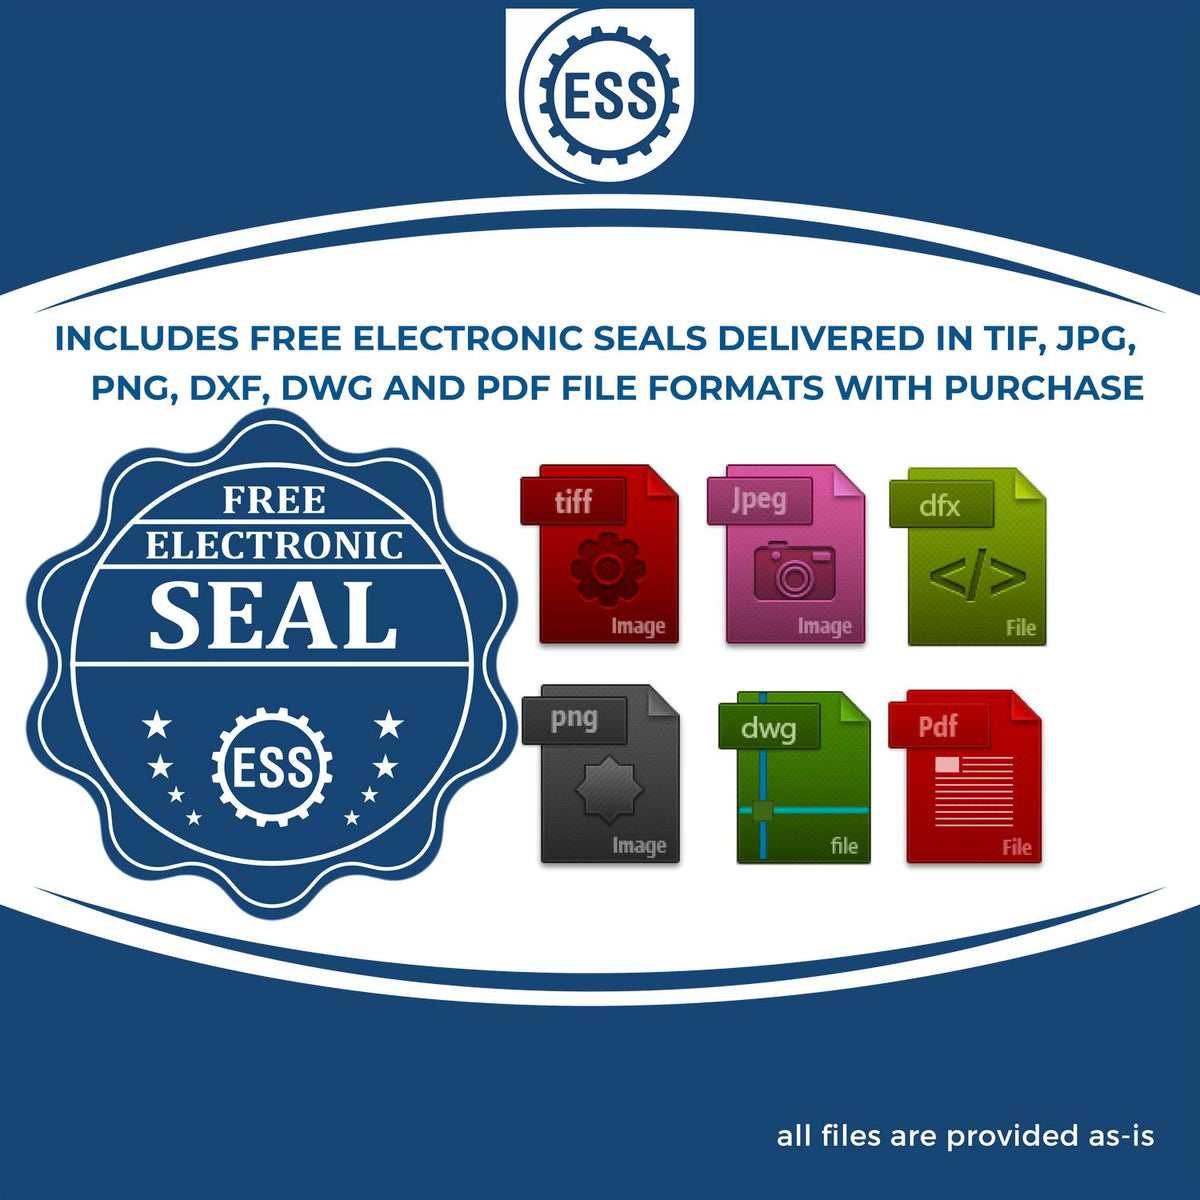 An infographic for the free electronic seal for the Heavy-Duty Delaware Rectangular Notary Stamp illustrating the different file type icons such as DXF, DWG, TIF, JPG and PNG.